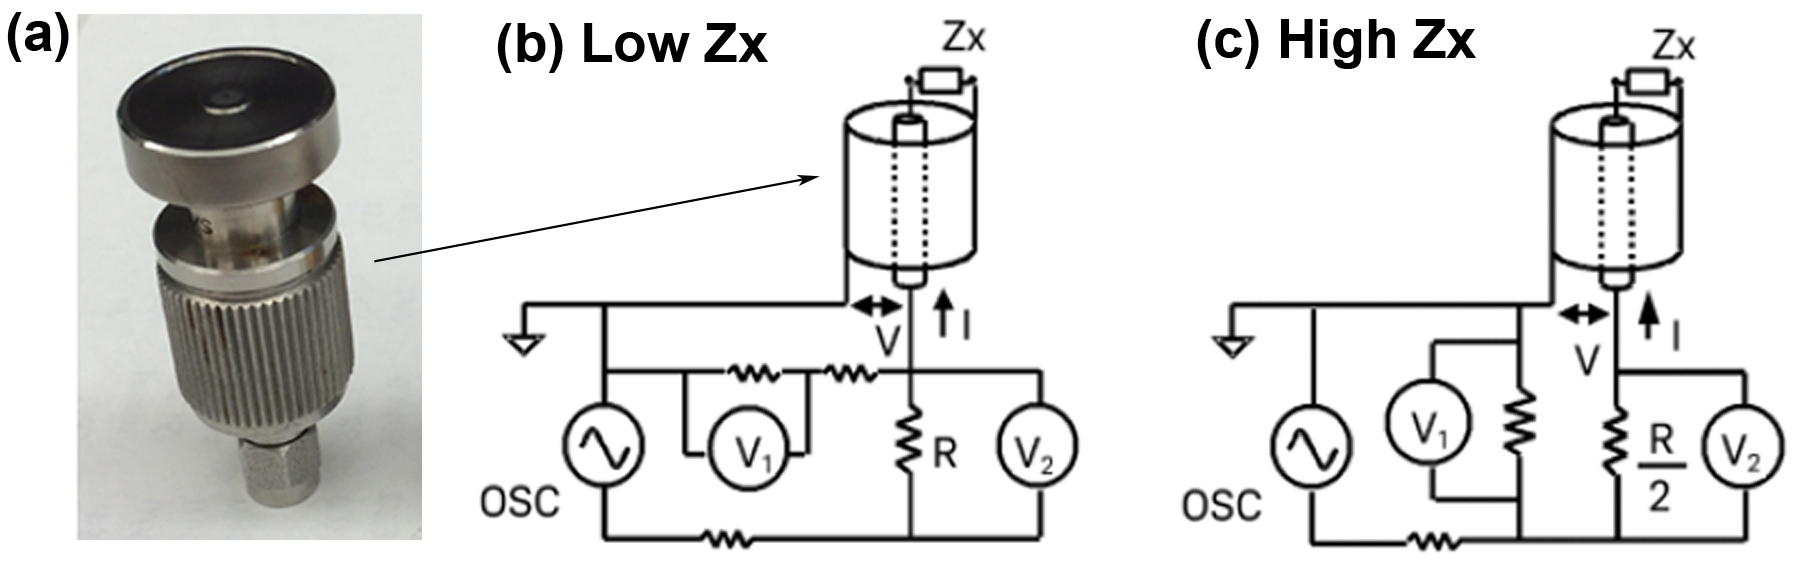 (a) Dielectric probe (liquids are placed on this probe). Circuit schematic of impedance measurements for (b) low and (c) high impedance materials. Circuit symbols Osc, Zx, V, I, and R represent oscillator (i.e. frequency source), sample impedance, voltage, current, and resistance, respectively.